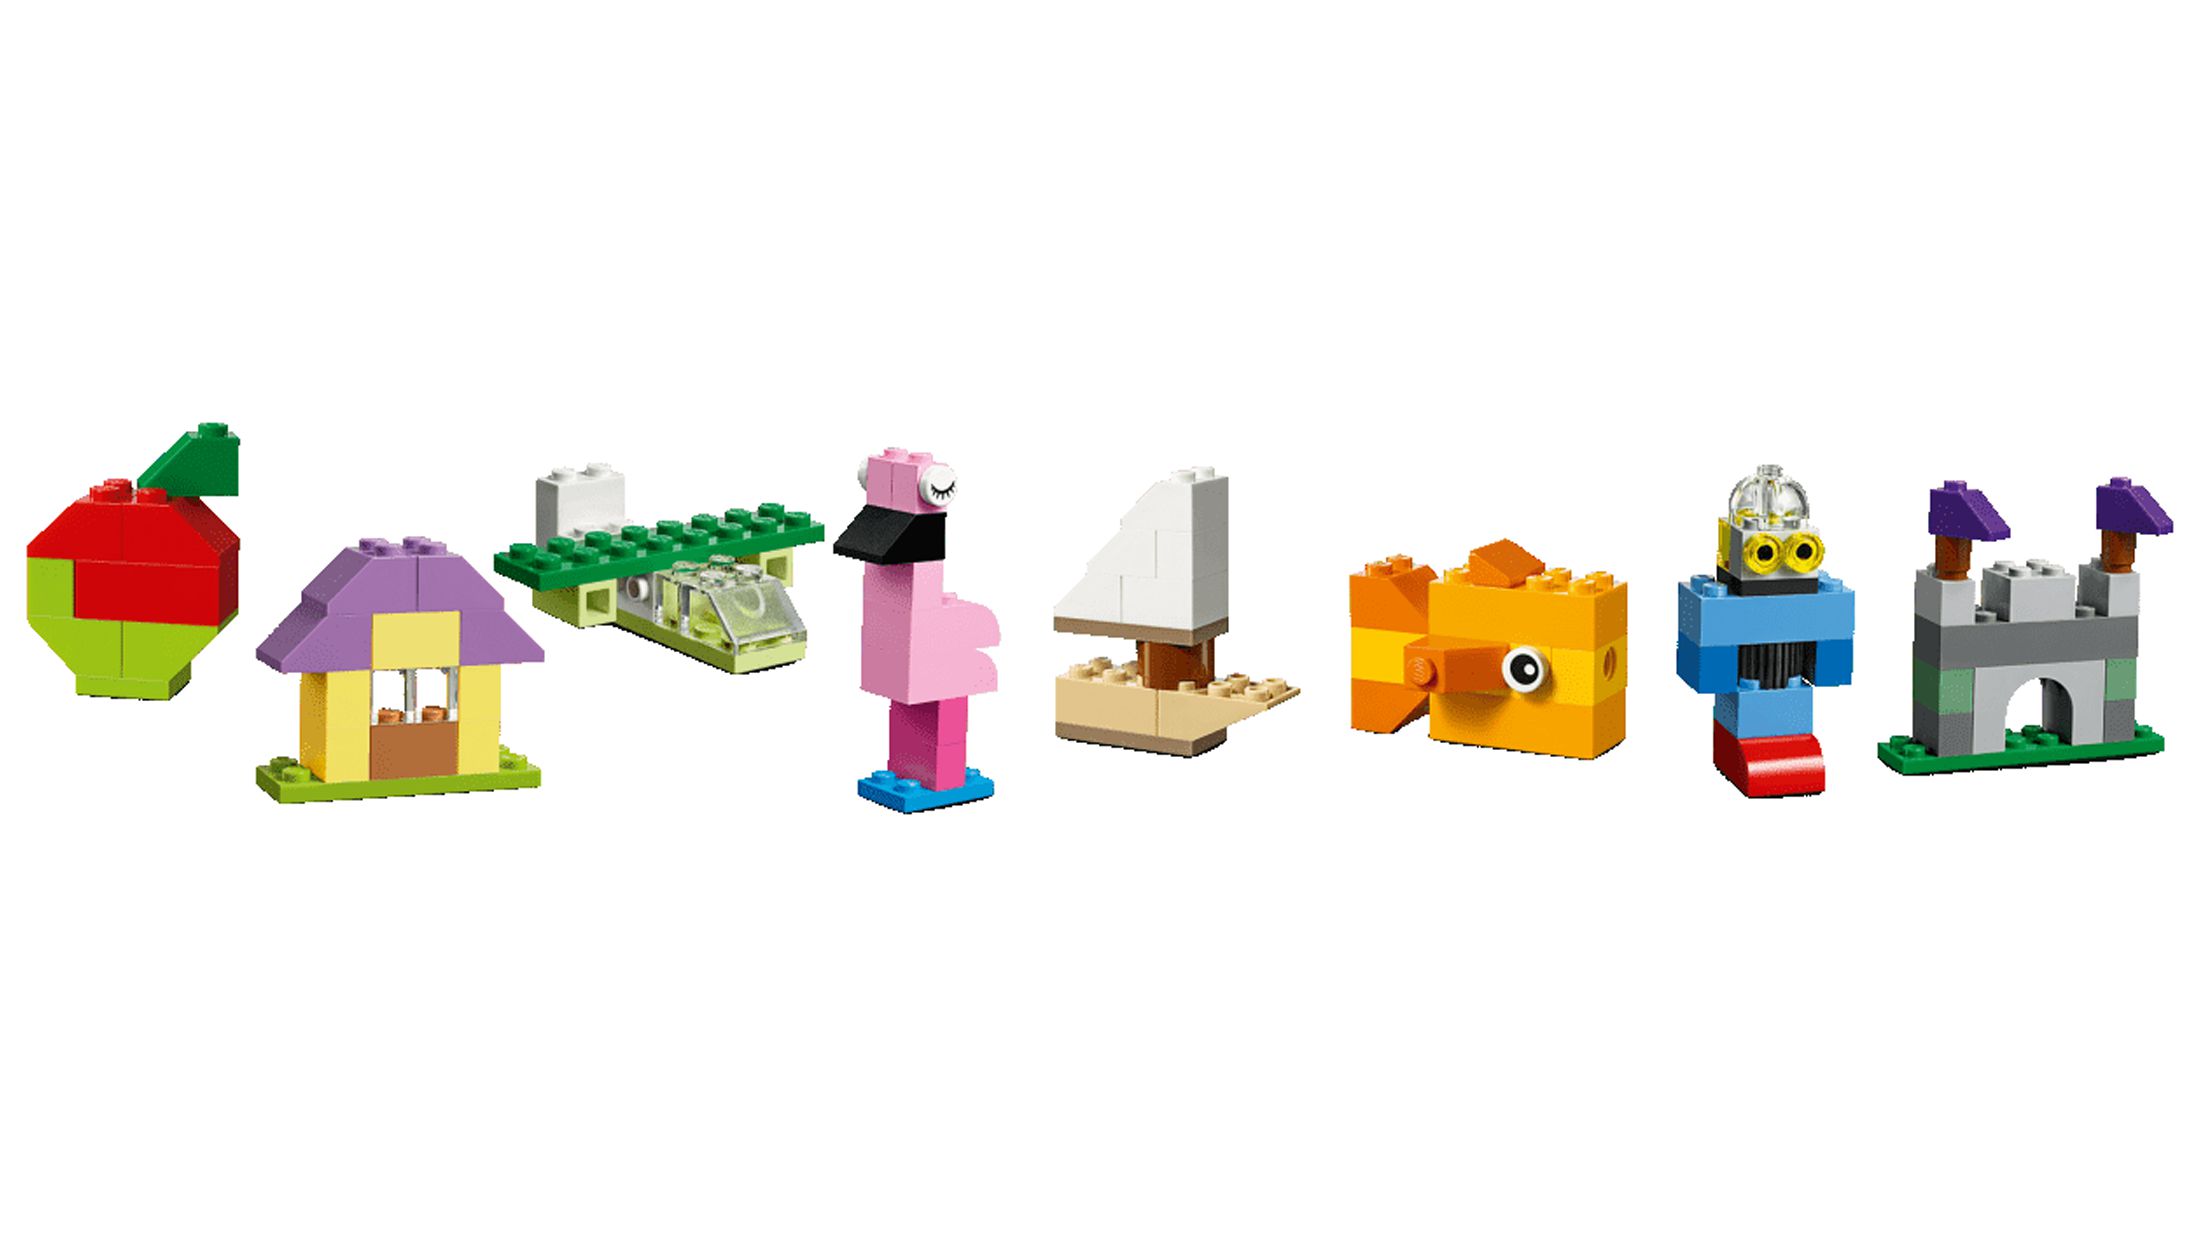 LEGO Classic Creative Suitcase 10713 - Includes Sorting Storage Organizer Case with Fun Colorful Building Bricks, Preschool Learning Toy for Kids to Play and Be Inspired by LEGO Masters - image 5 of 7